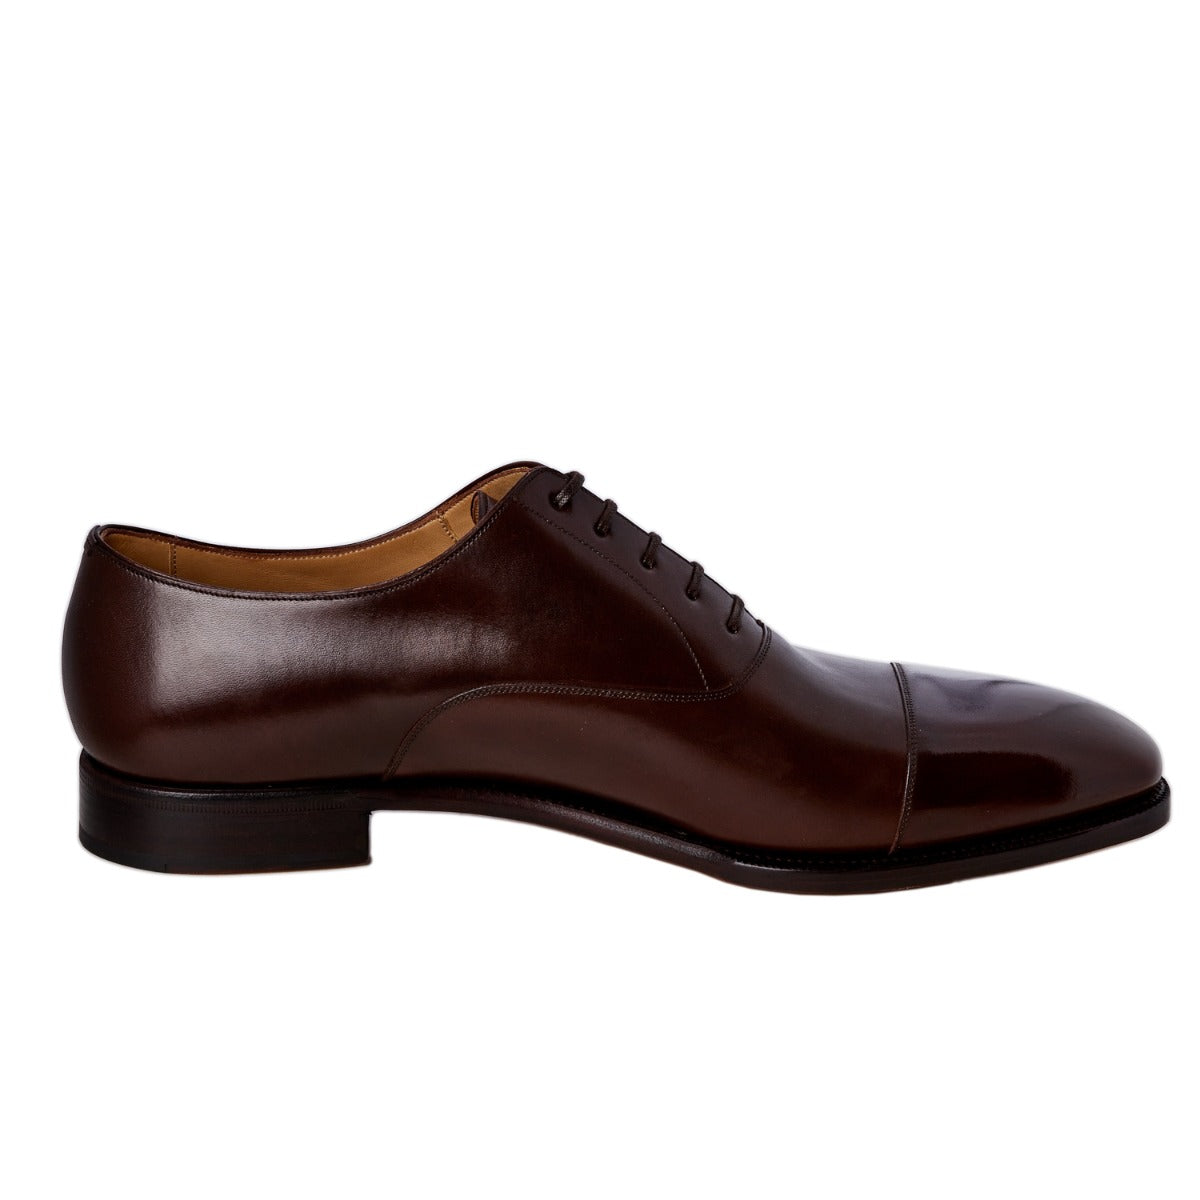 A men's TLB Dark Brown Captoe Oxford 10UK shoe on a white background, featuring the KirbyAllison.com brand.